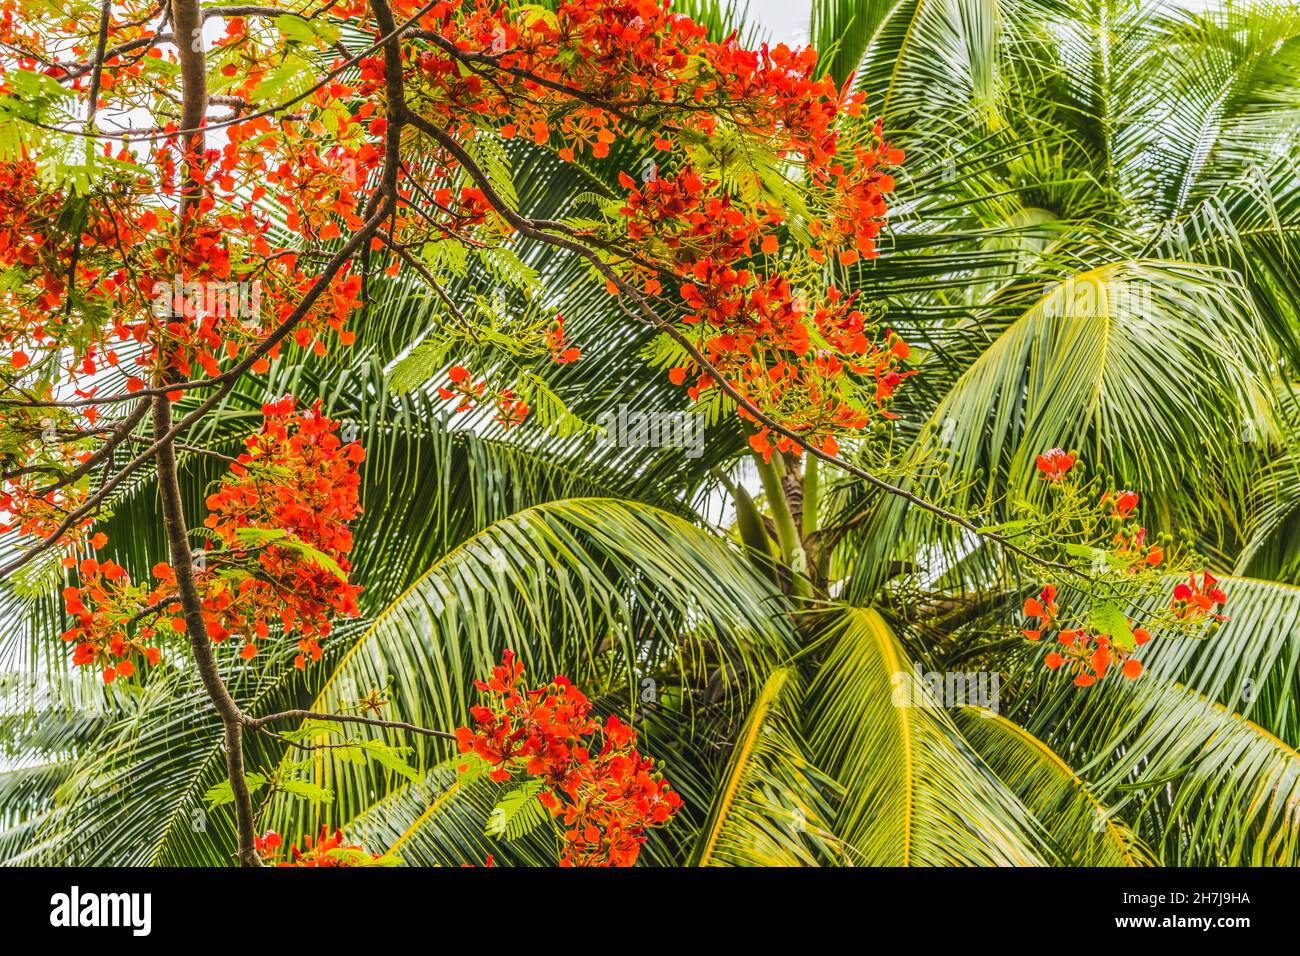 Red Flame Tree Flowers Delonix Regia Royal Poinciana Palm Trees Green Leaves Moorea Tahiti French Polynesia. Native to Madagascar, now in tropical pla Stock Photo